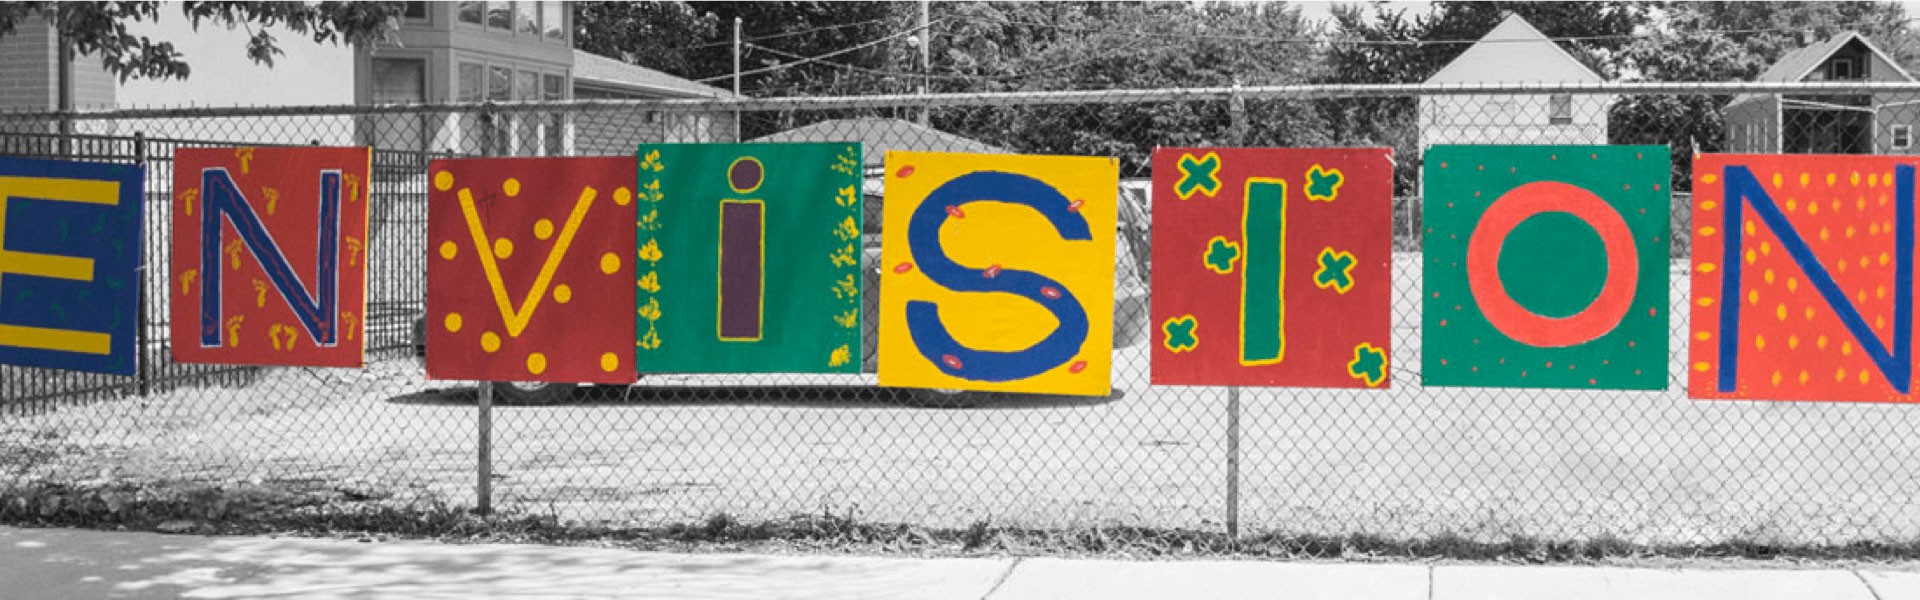 Colorful painted sign saying, "Envision" hanging outside on a fence on a snowy day